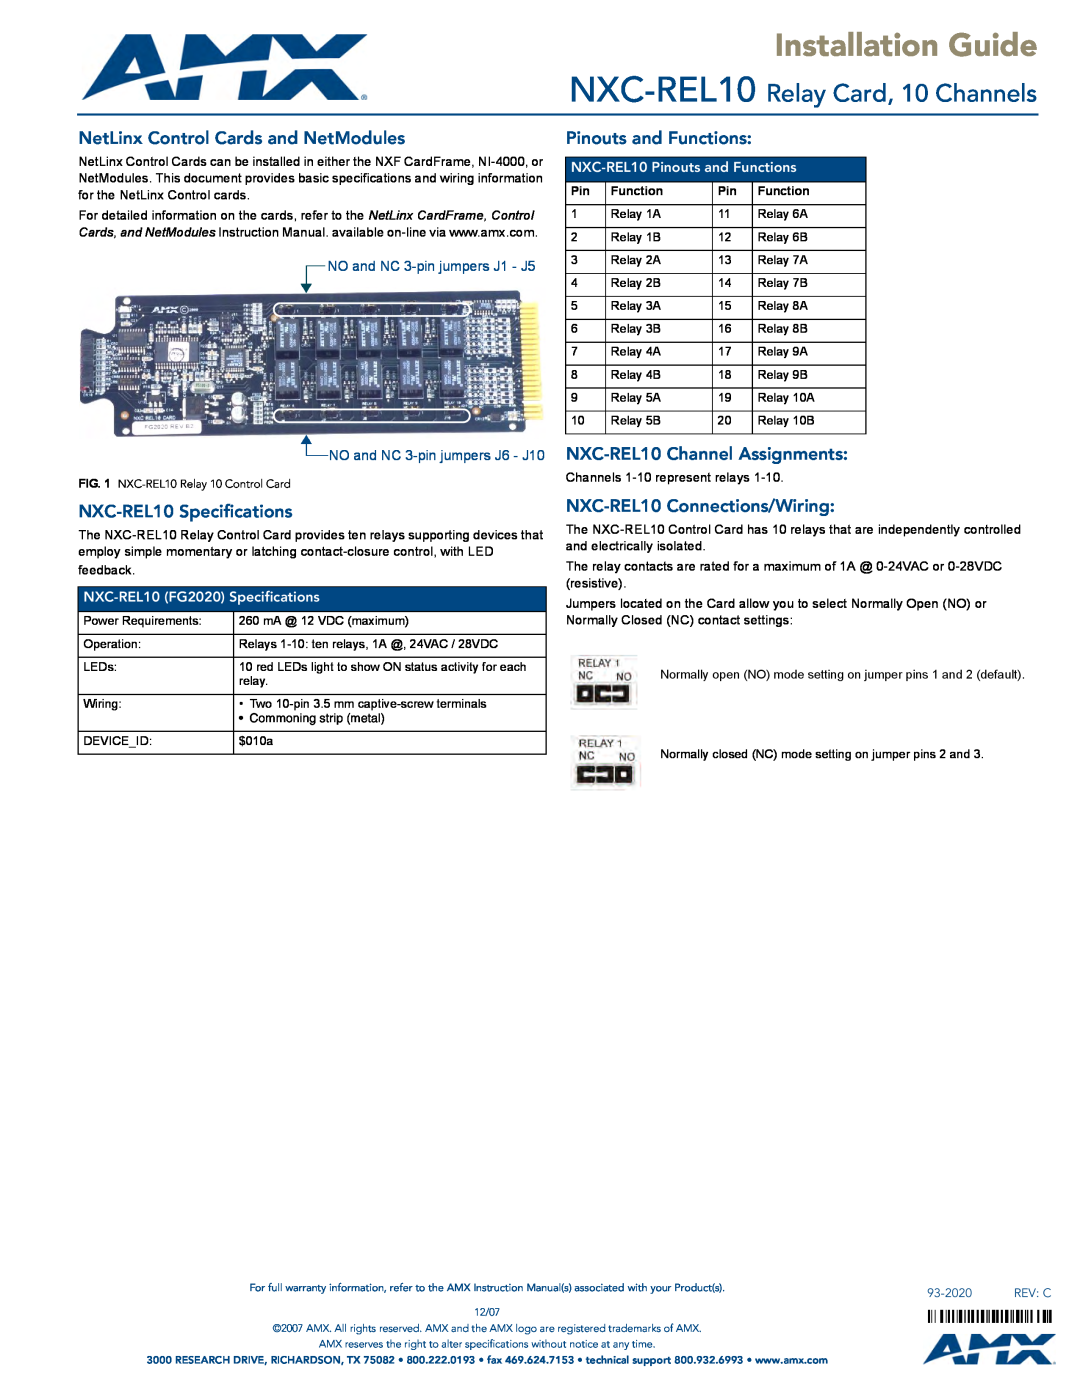 AMX specifications Installation Guide, NXC-REL10 Relay Card, 10 Channels, NetLinx Control Cards and NetModules 